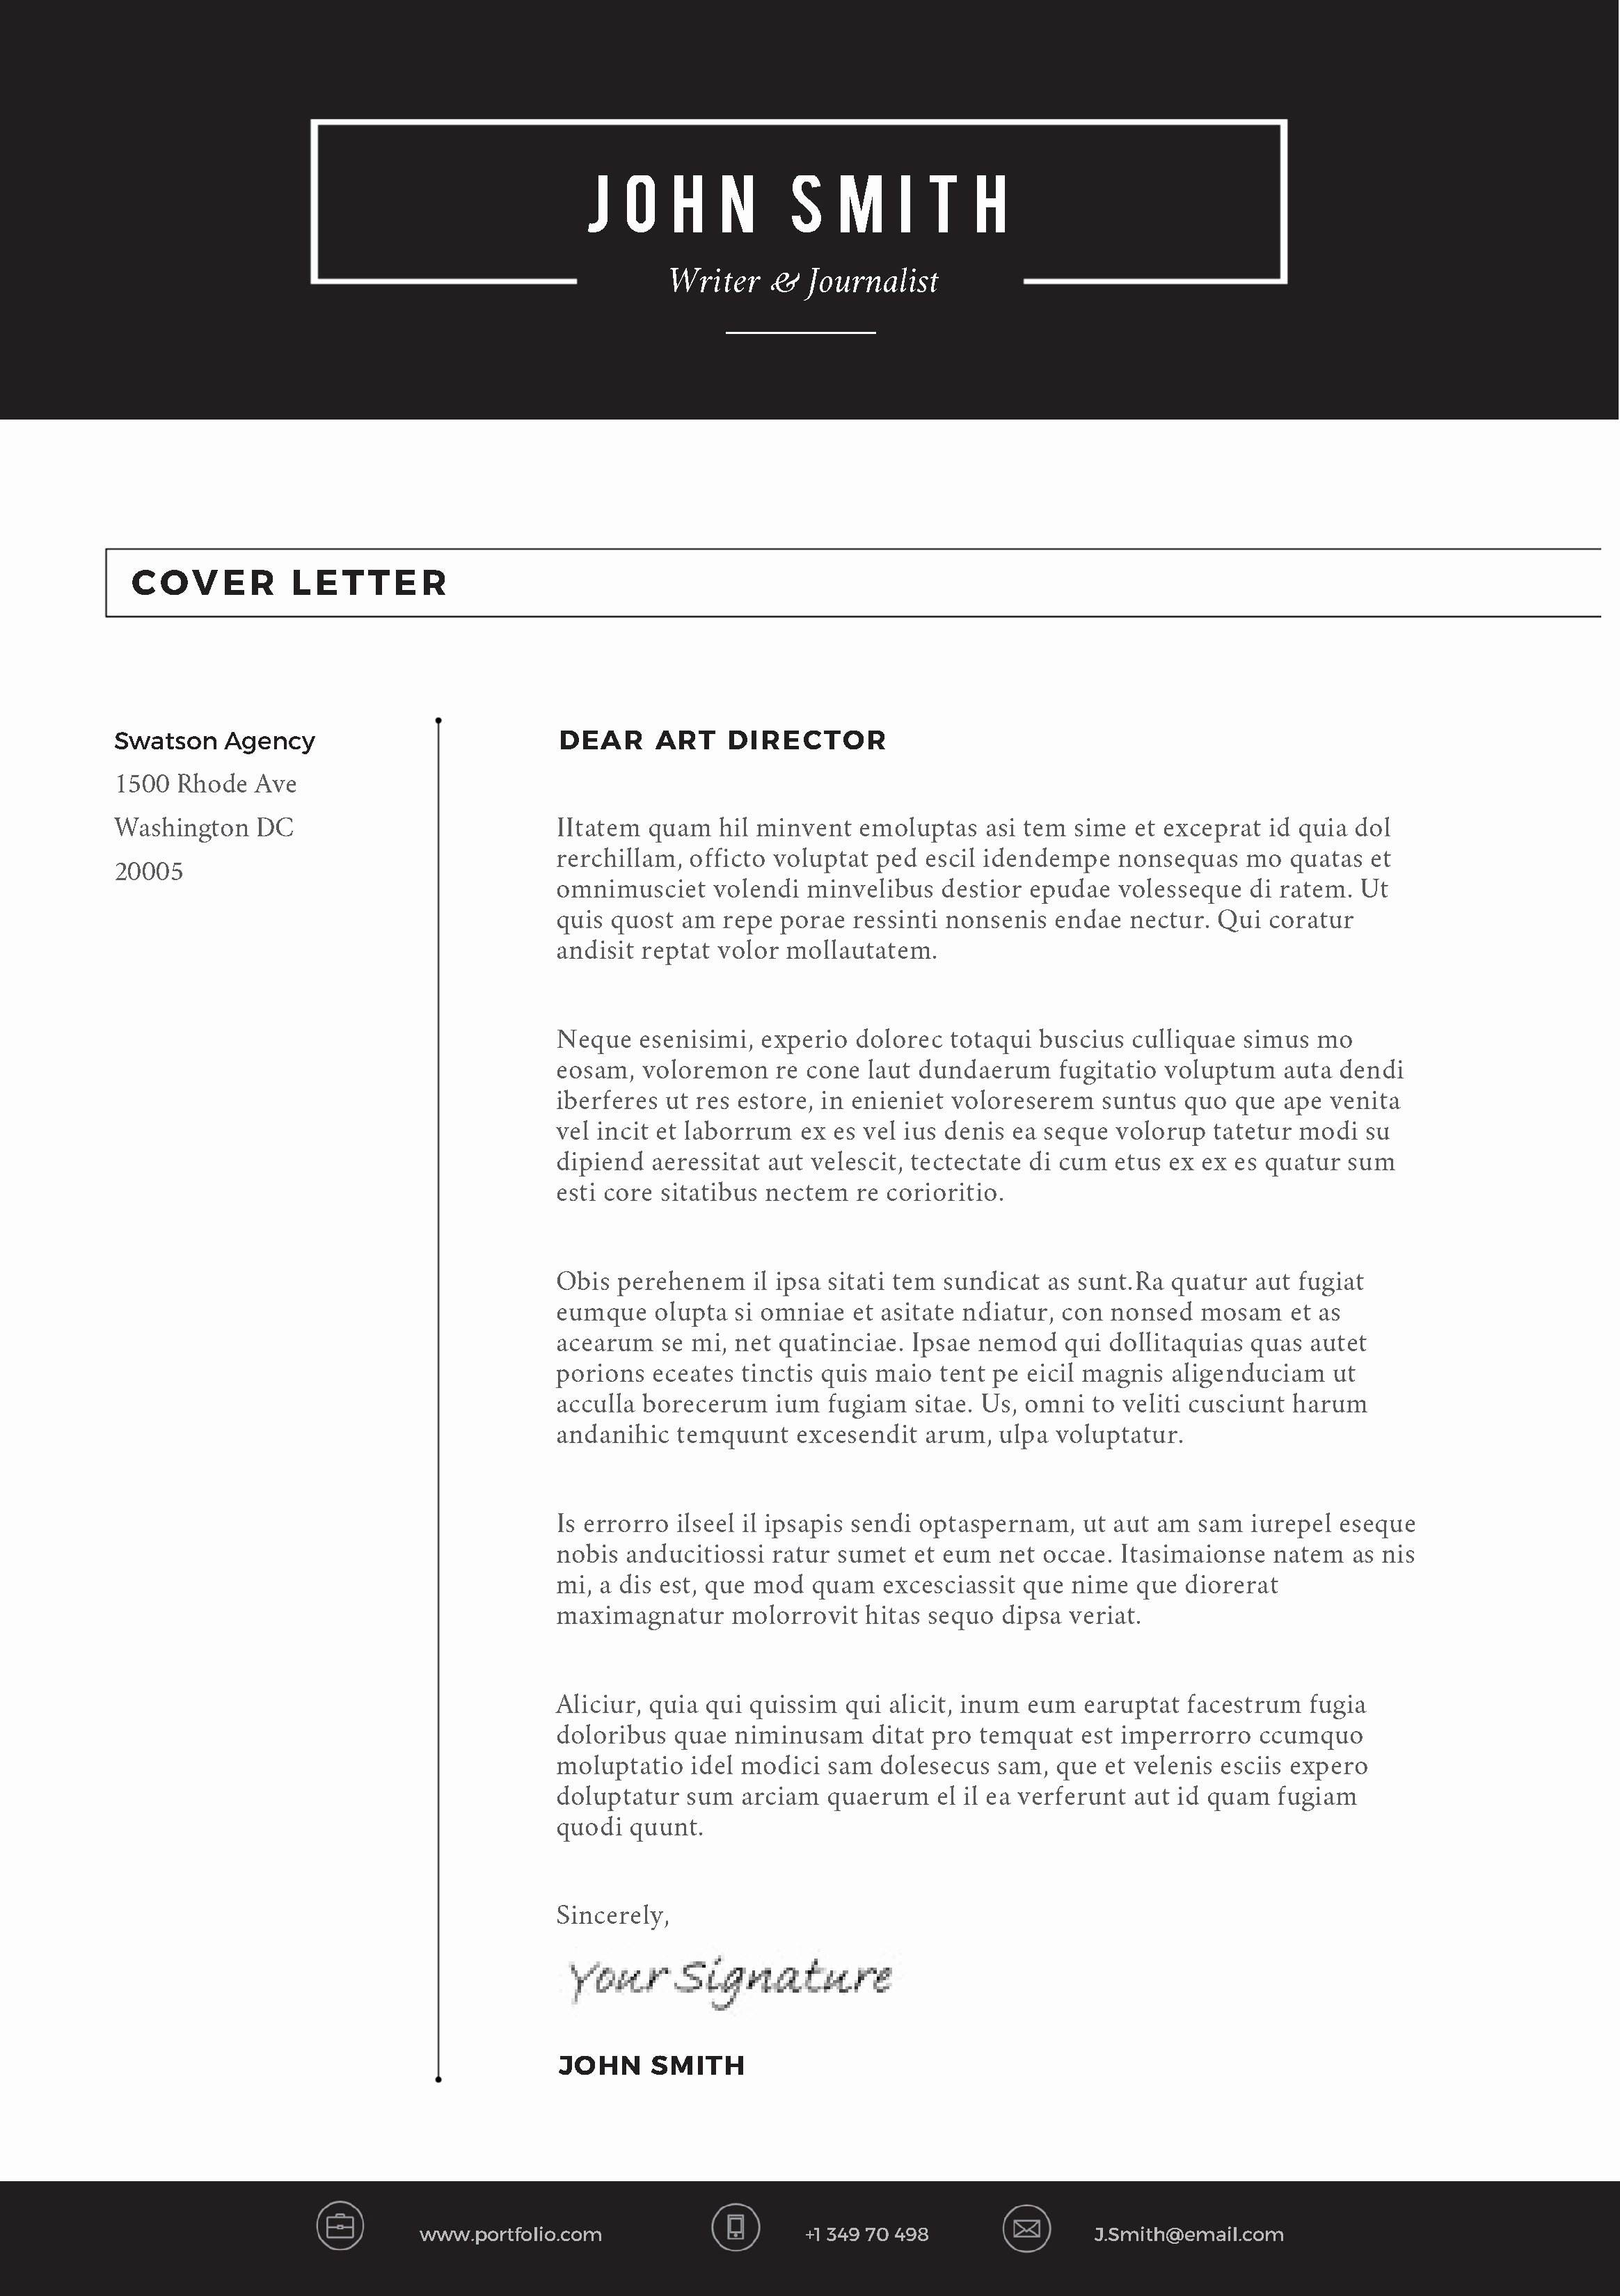 Microsoft Word Cover Letter Templates Awesome Microsoft Word Sleek Cover Letter